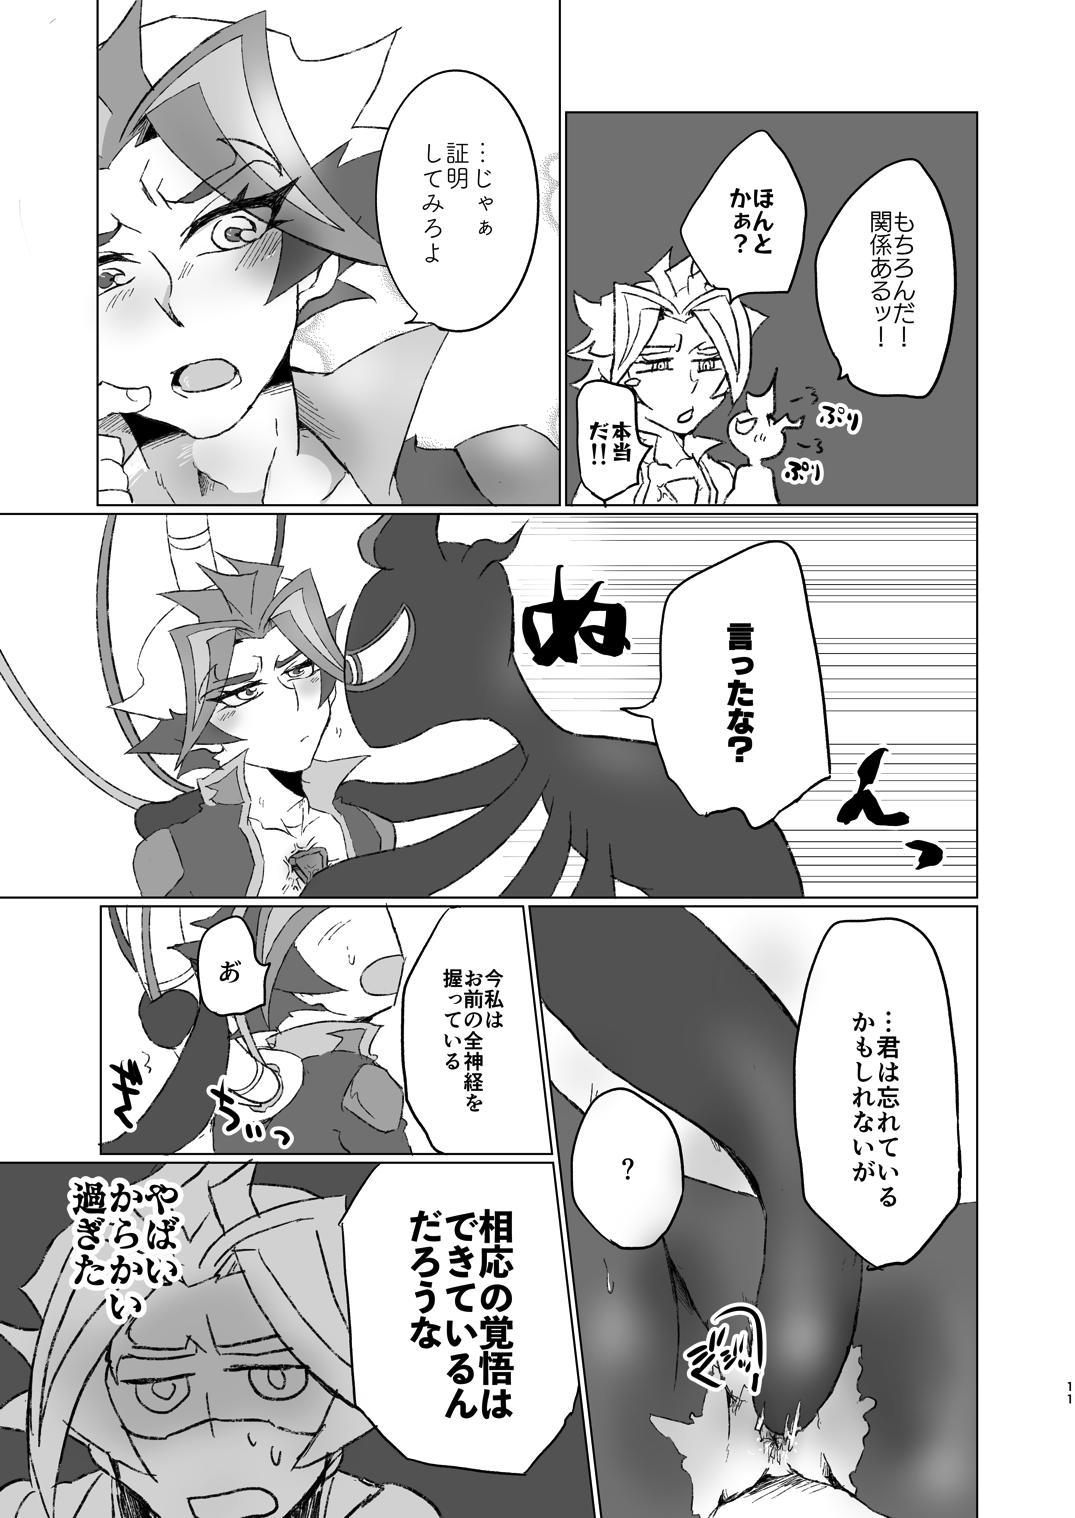 Analfucking A little bit further - Yu-gi-oh vrains Costume - Page 10